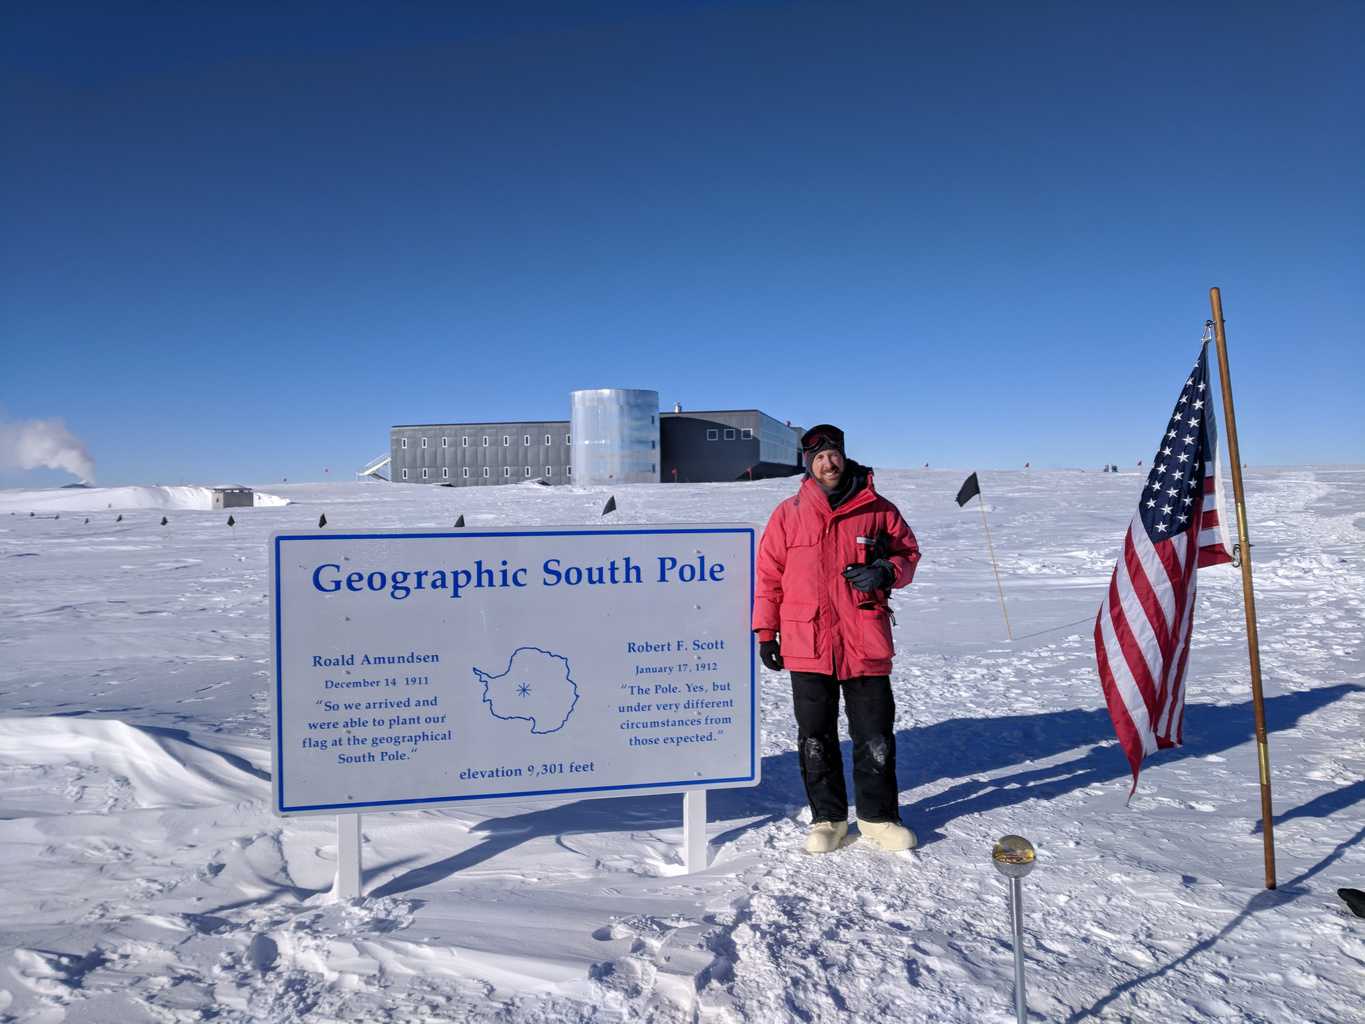 Geographic South Pole Marker 2018